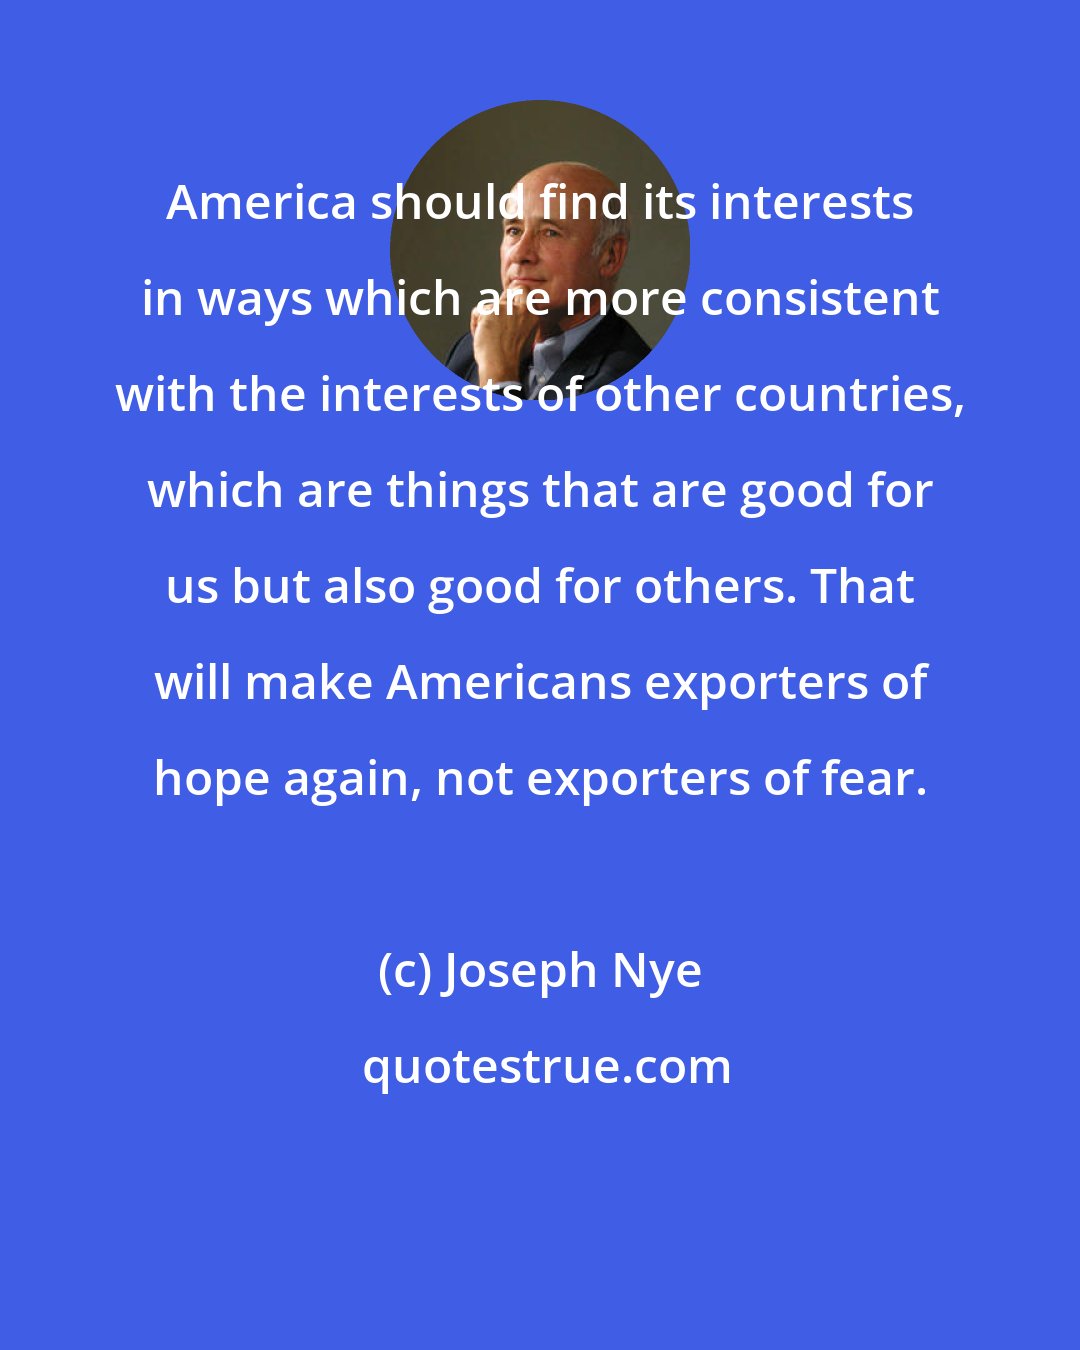 Joseph Nye: America should find its interests in ways which are more consistent with the interests of other countries, which are things that are good for us but also good for others. That will make Americans exporters of hope again, not exporters of fear.